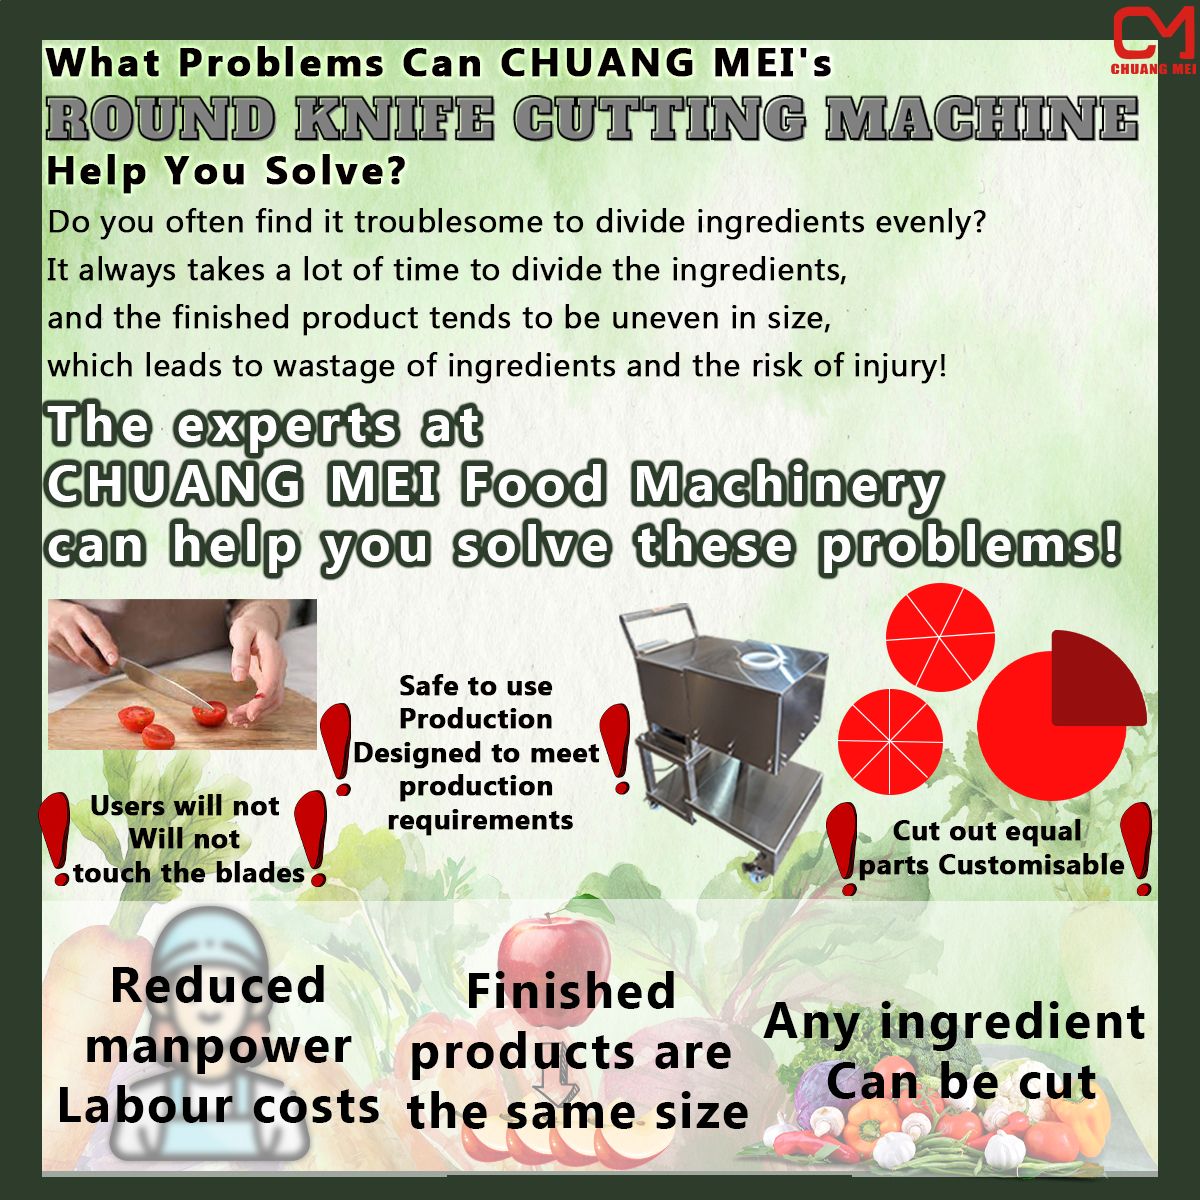 What problems can CHUANG MEI's Round Knife Cutting Machine help you solve?